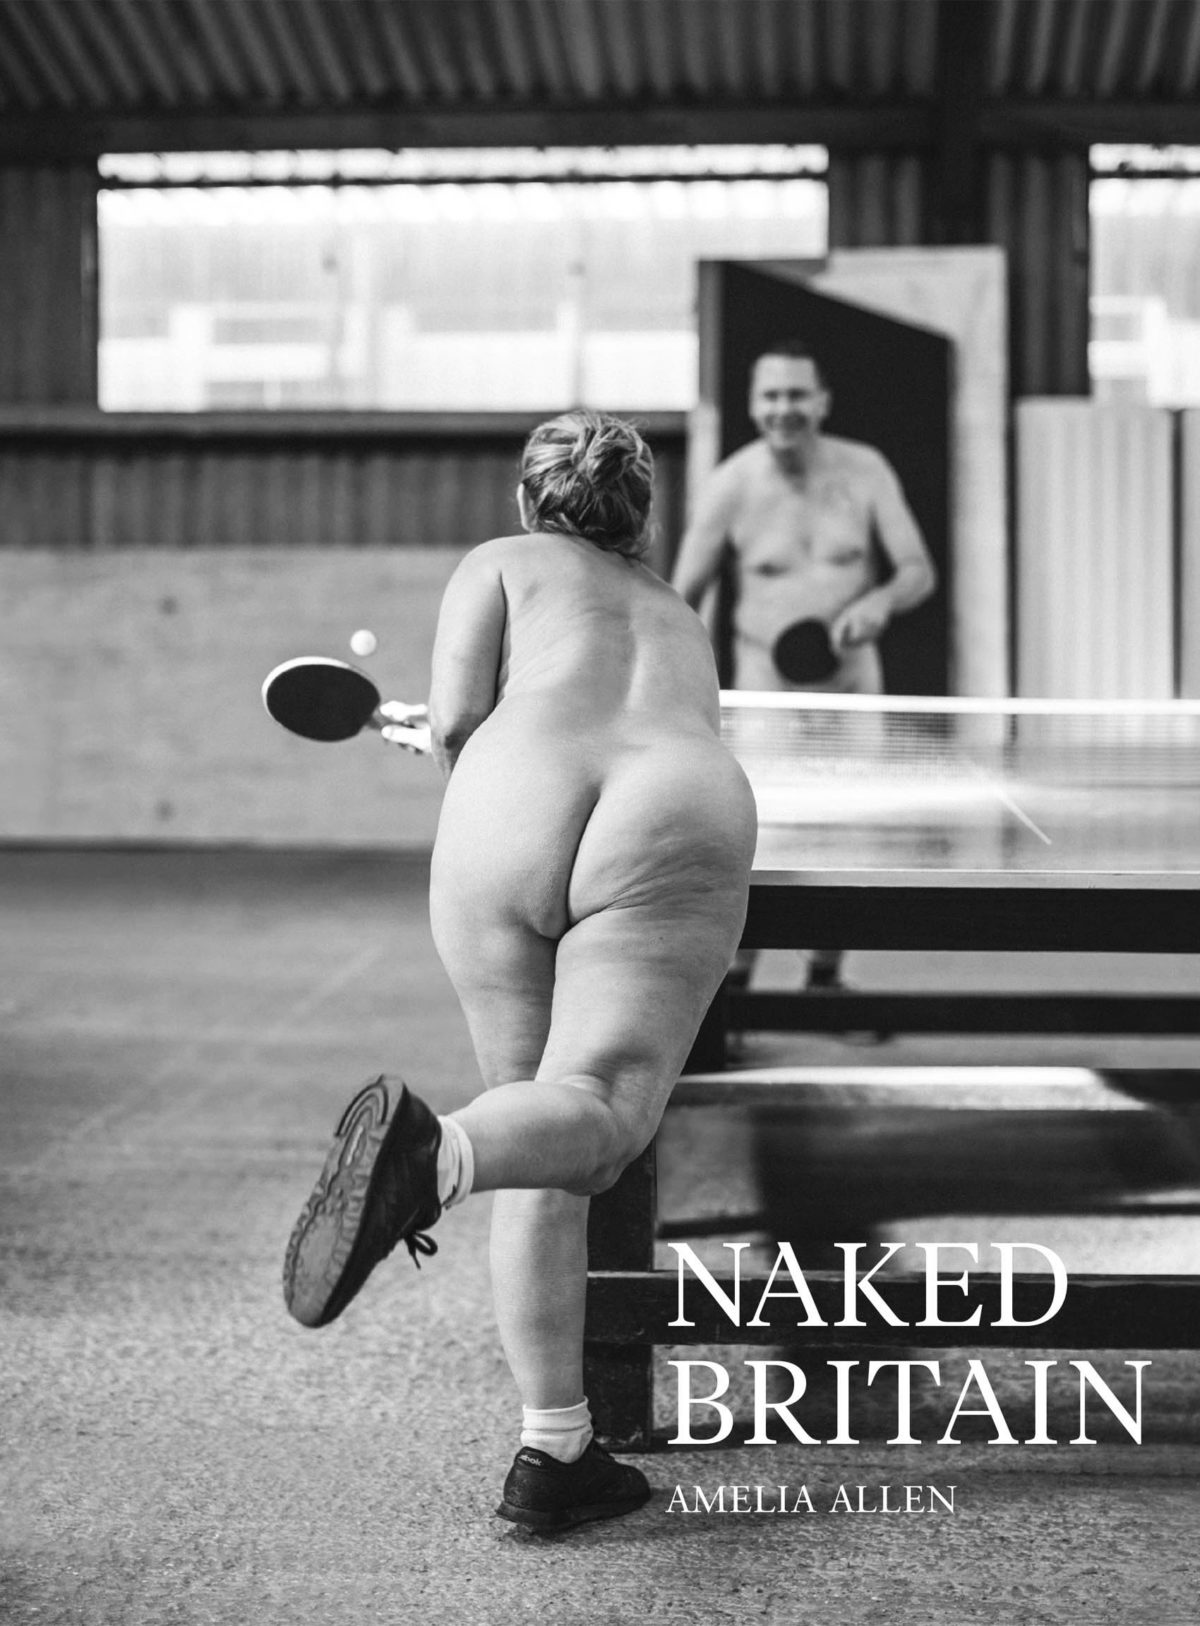 From Naked Britain © Amelia Allen